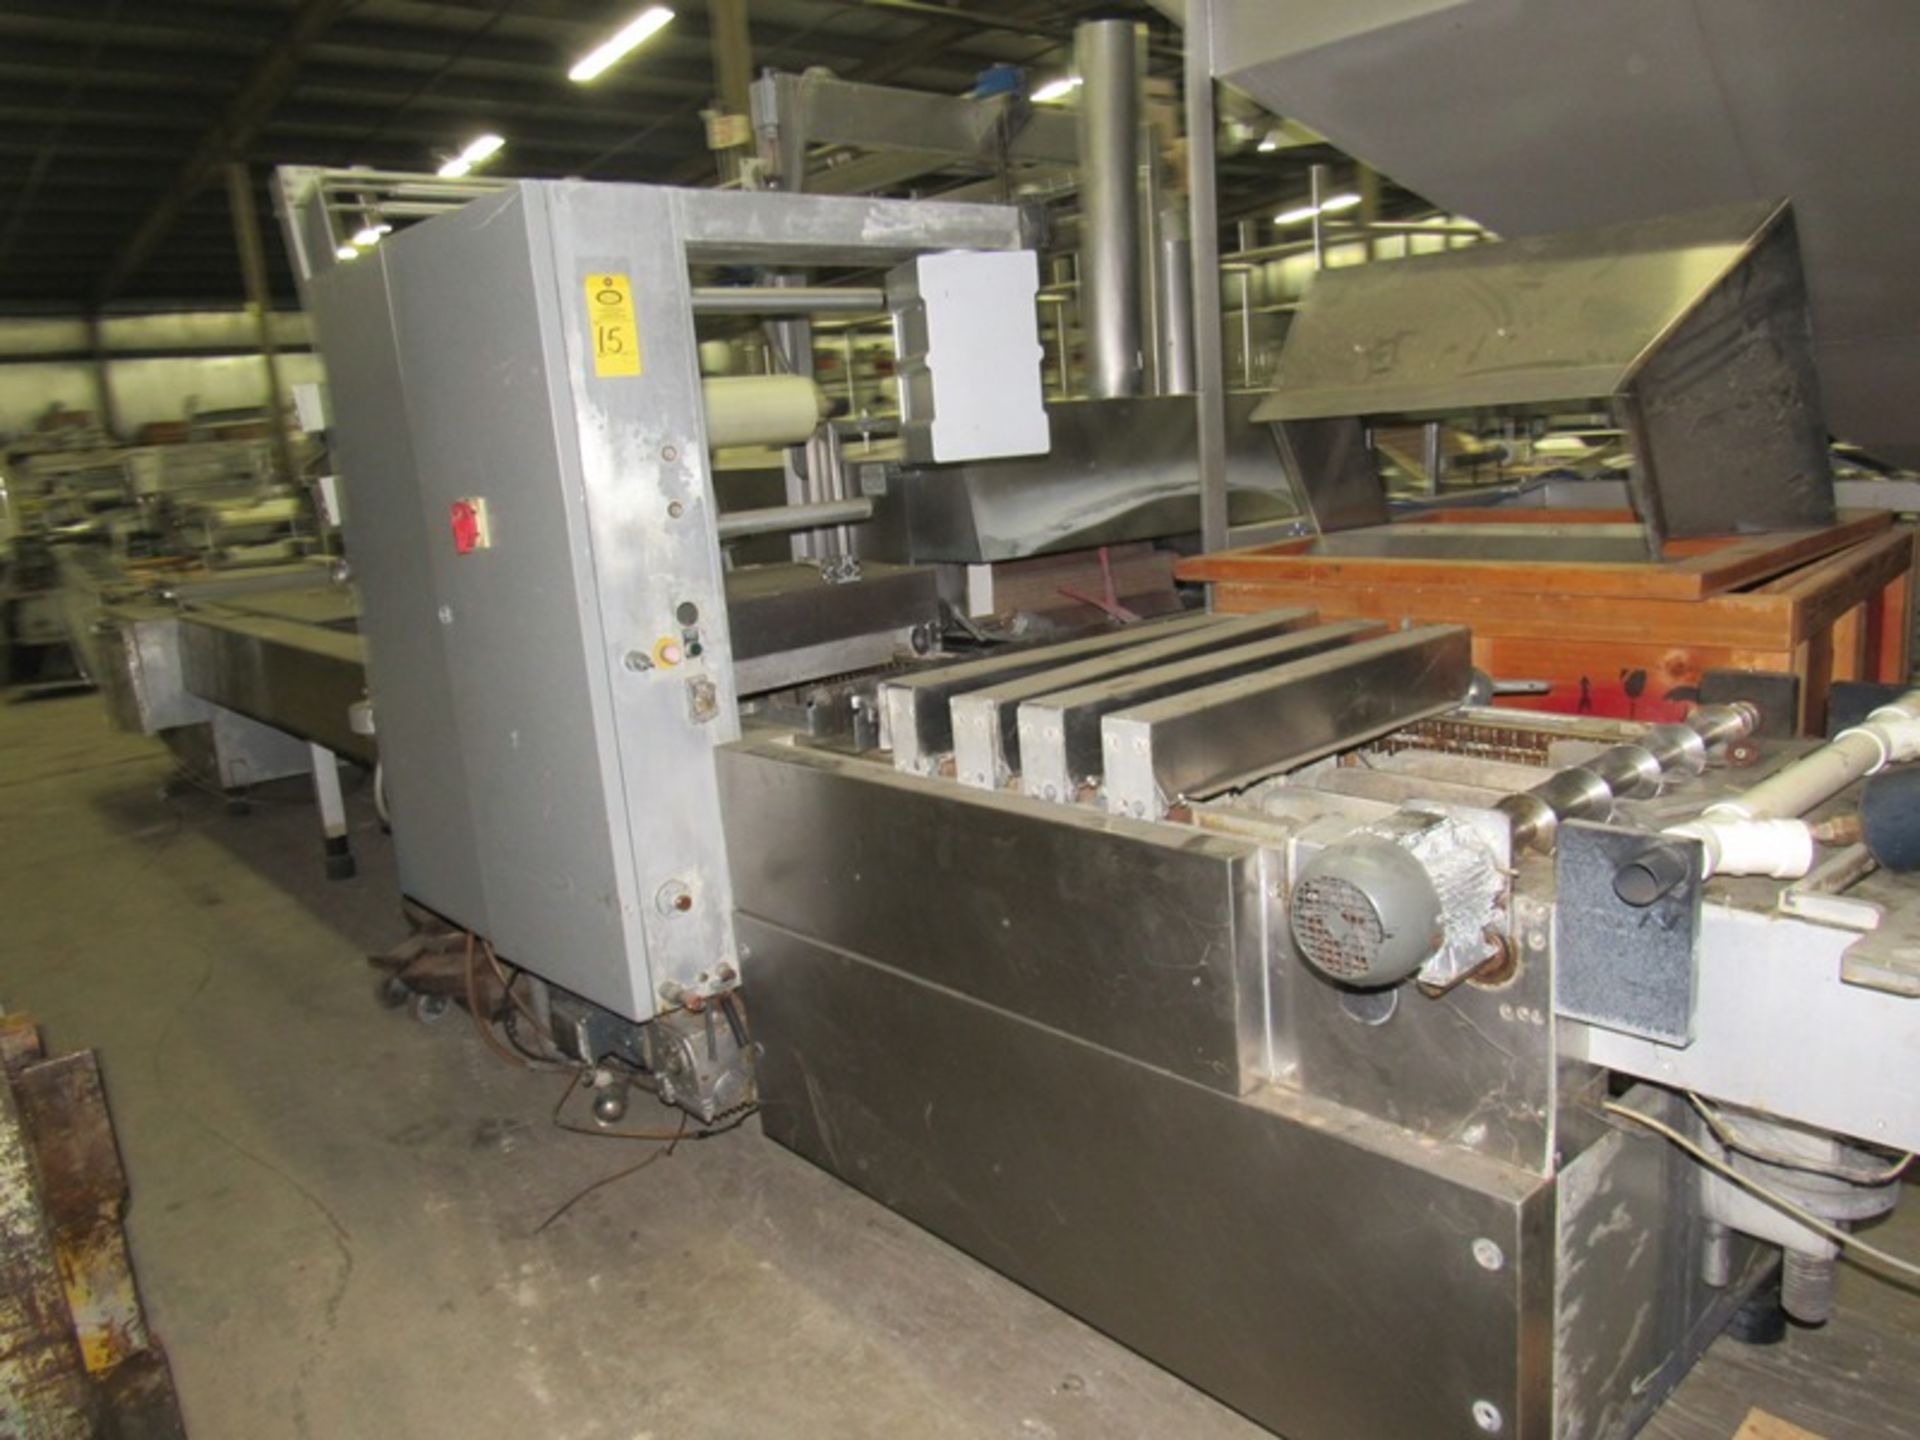 Kramer Grebe Rollstock Packager, 560 mm between chains, 16 up die, approx.: 120 mm wide X 150 mm